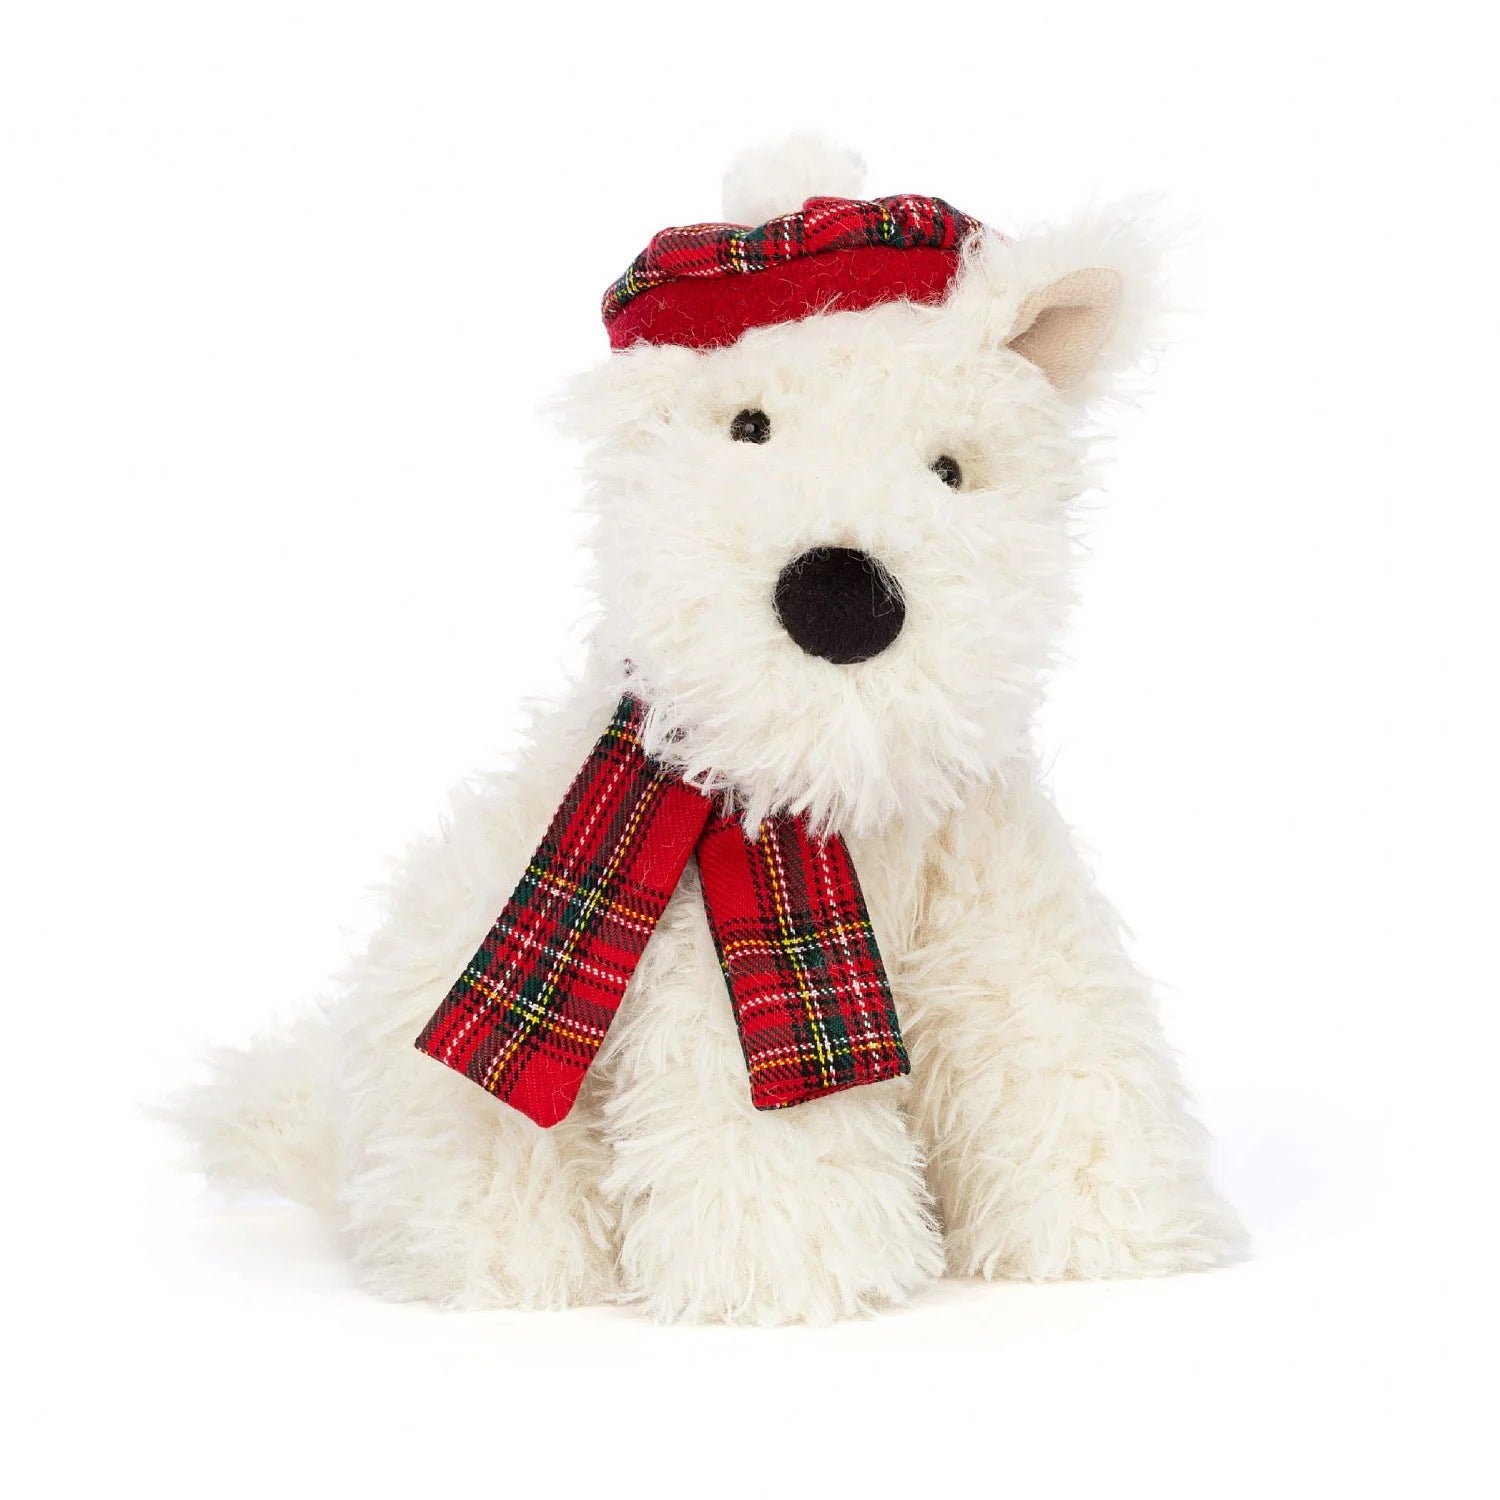 Munro the Scottie Dog is a white plush stuffed dog with luxurious fur. This Winter Warmer version of Munro Scottie Dog adds an extra stylish red tartan plaid scarf around its neck. Munro's floppy ears and wagging tail give it an endearing and playful appearance.  Its high-quality craftsmanship and attention to detail make it a fantastic choice for dog lovers of all ages.